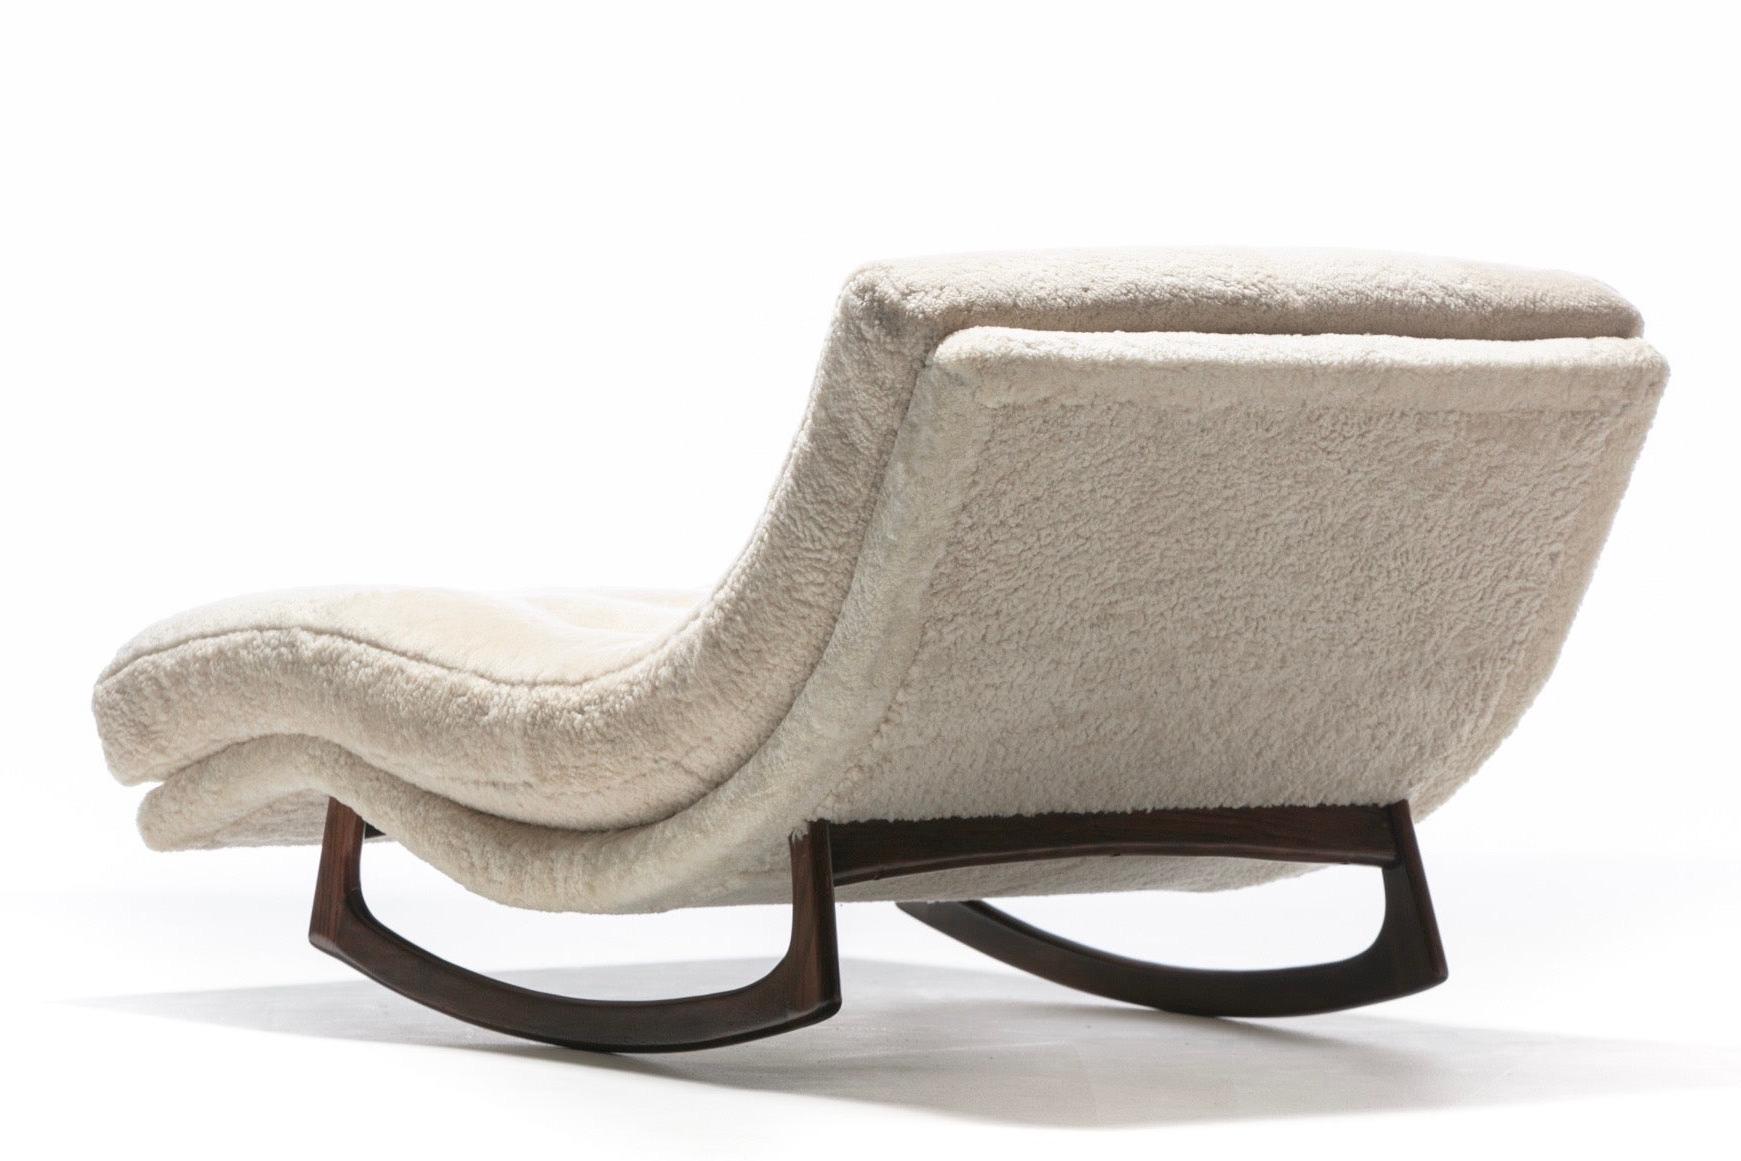 Mid-20th Century Adrian Pearsall Waive Chaise Rocker Lounge in Ivory Shearling with Walnut Legs